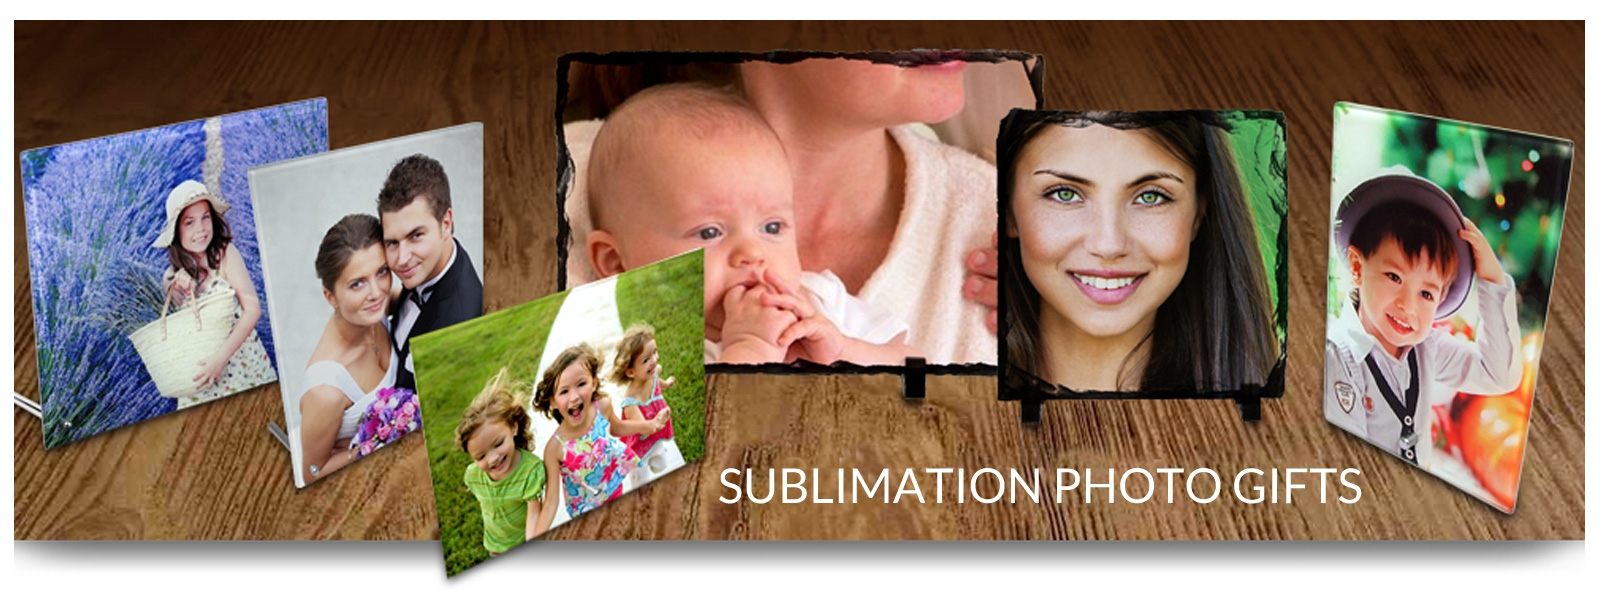 Sublimation Photo Gifts